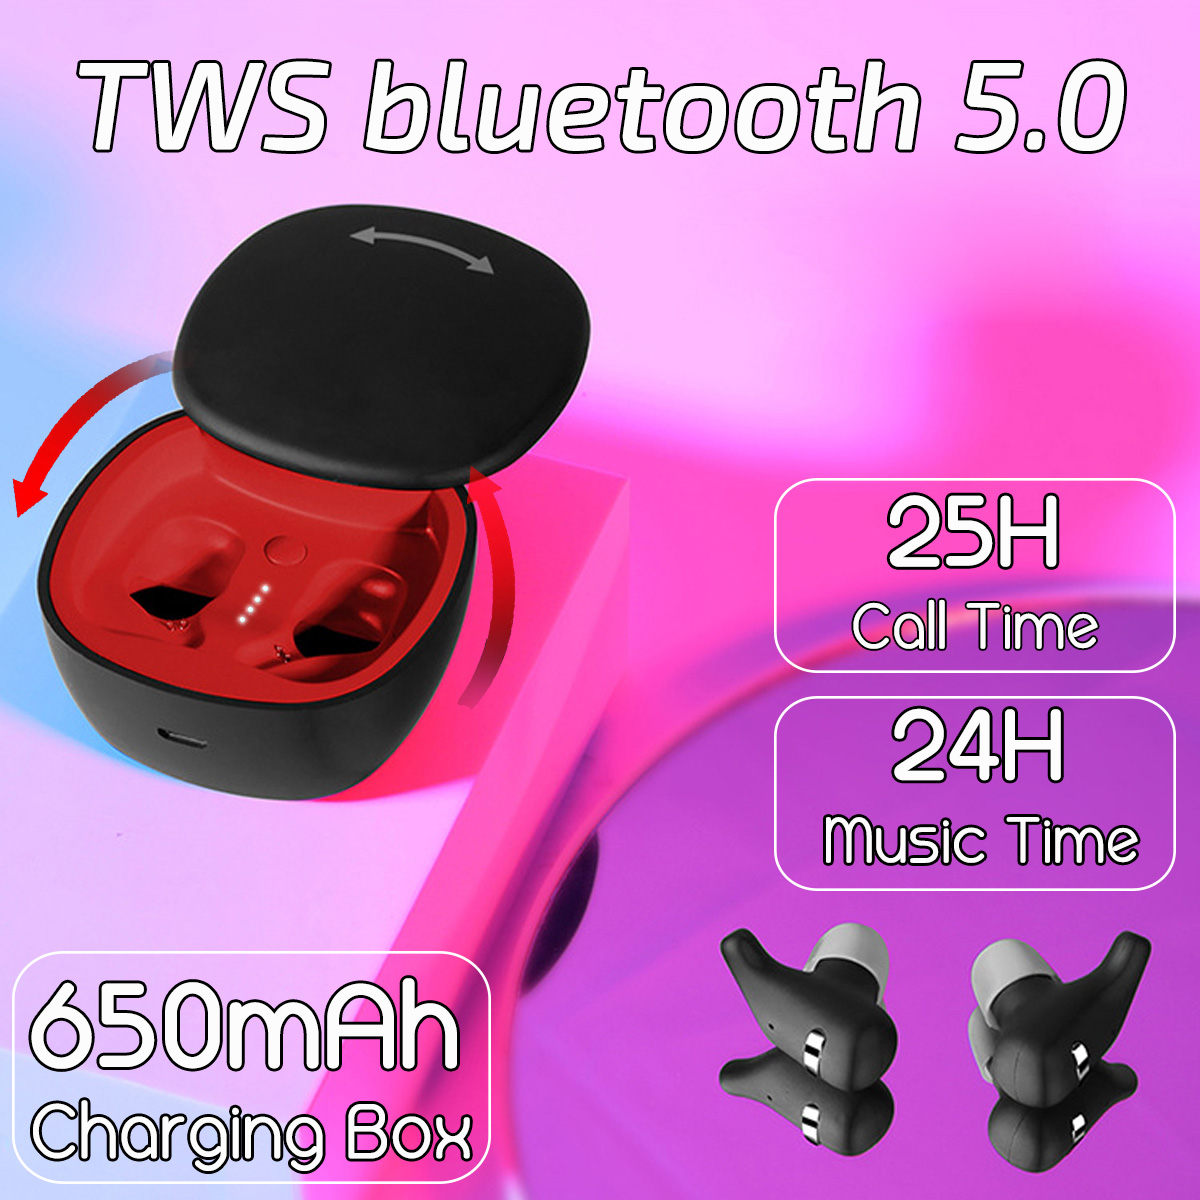 bluetooth-50-TWS-Wireless-Earphone-Bilateral-Call-Auto-Pairing-Voice-Control-Stereo-Headphone-with-C-1435523-1